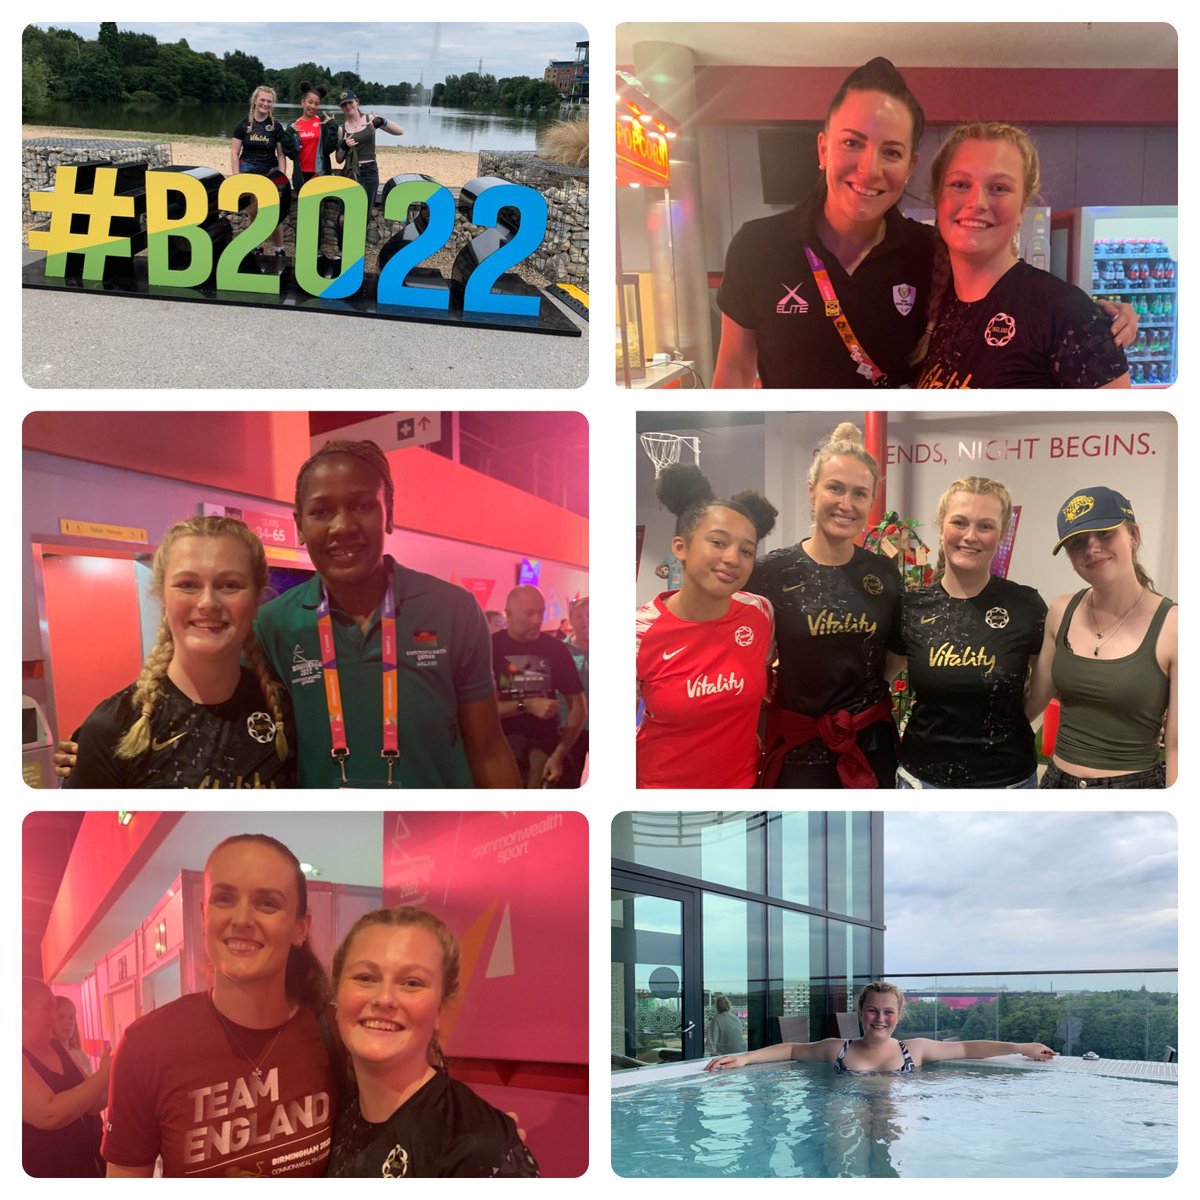 A fantastic day watching @EnglandNetball  at the @BirminghamGames with great friends @fibertie @AlisonYoung2207 with the opportunity to meet some inspirational athletes then time to relax in the spa @gentinghotelRWB before dinner @LeedsAthleticNC @FulneckSport @FulneckSchool